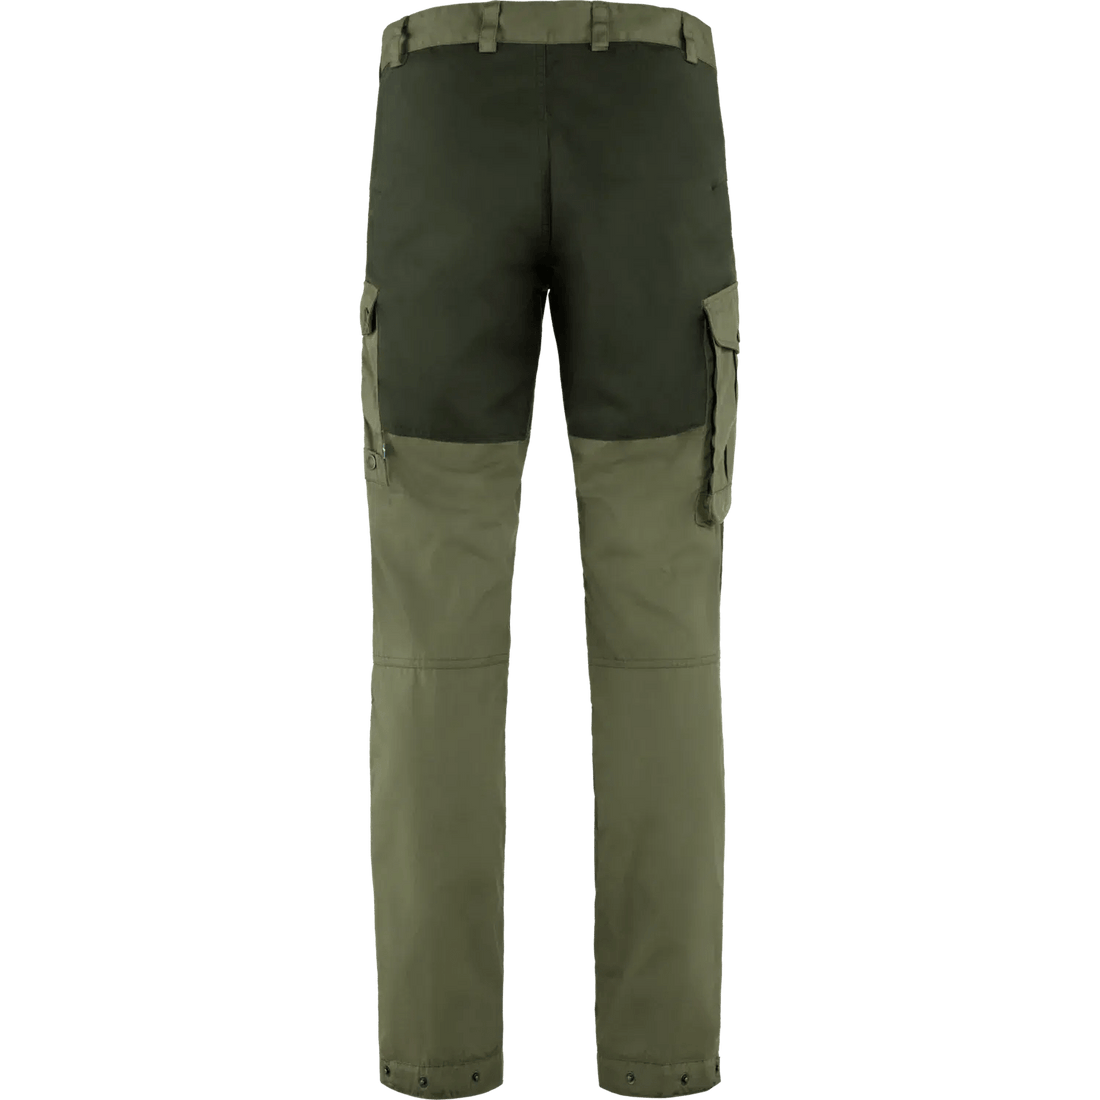 Mens Womens Casual Baggy Harem Cargo Capri Pirate Tapered Shorts Pants  Trousers  eBay menspants mens   Mens fashion jeans Mens casual  outfits Mens outfits